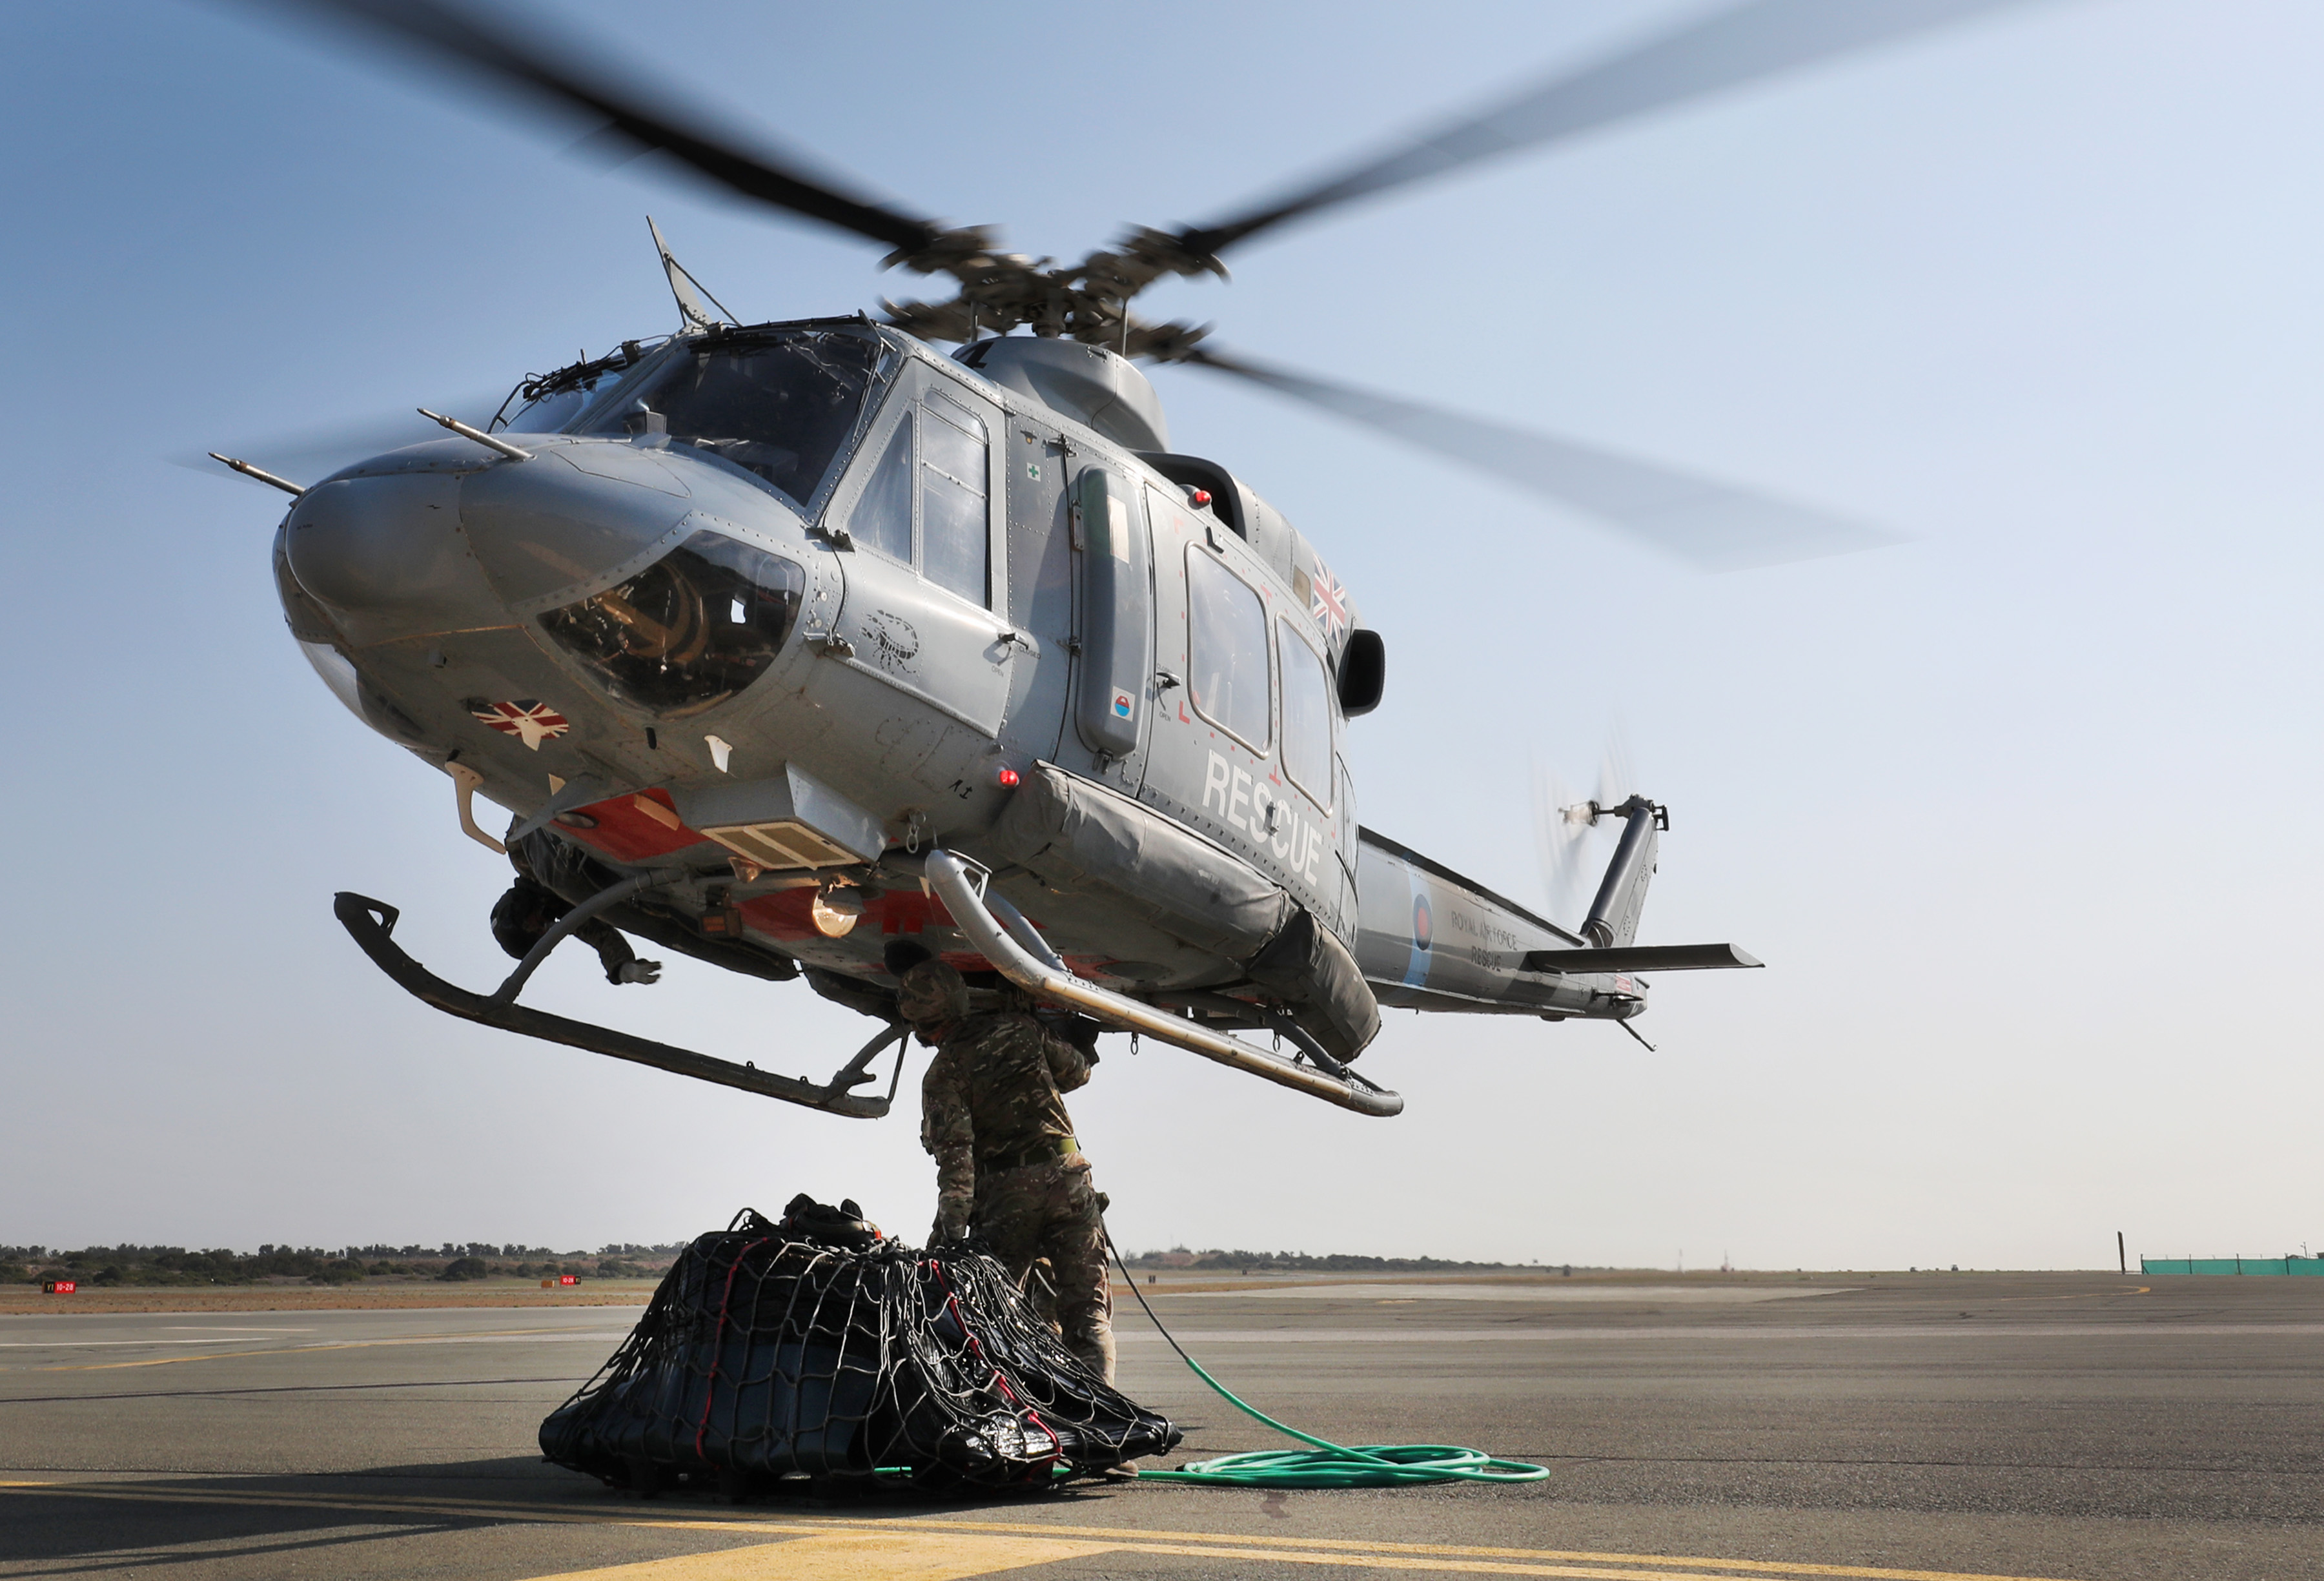 Image shows RAF aviators attaching cargo to the under slung load carrier of a Chinook helicopter, as it hovers overhead.